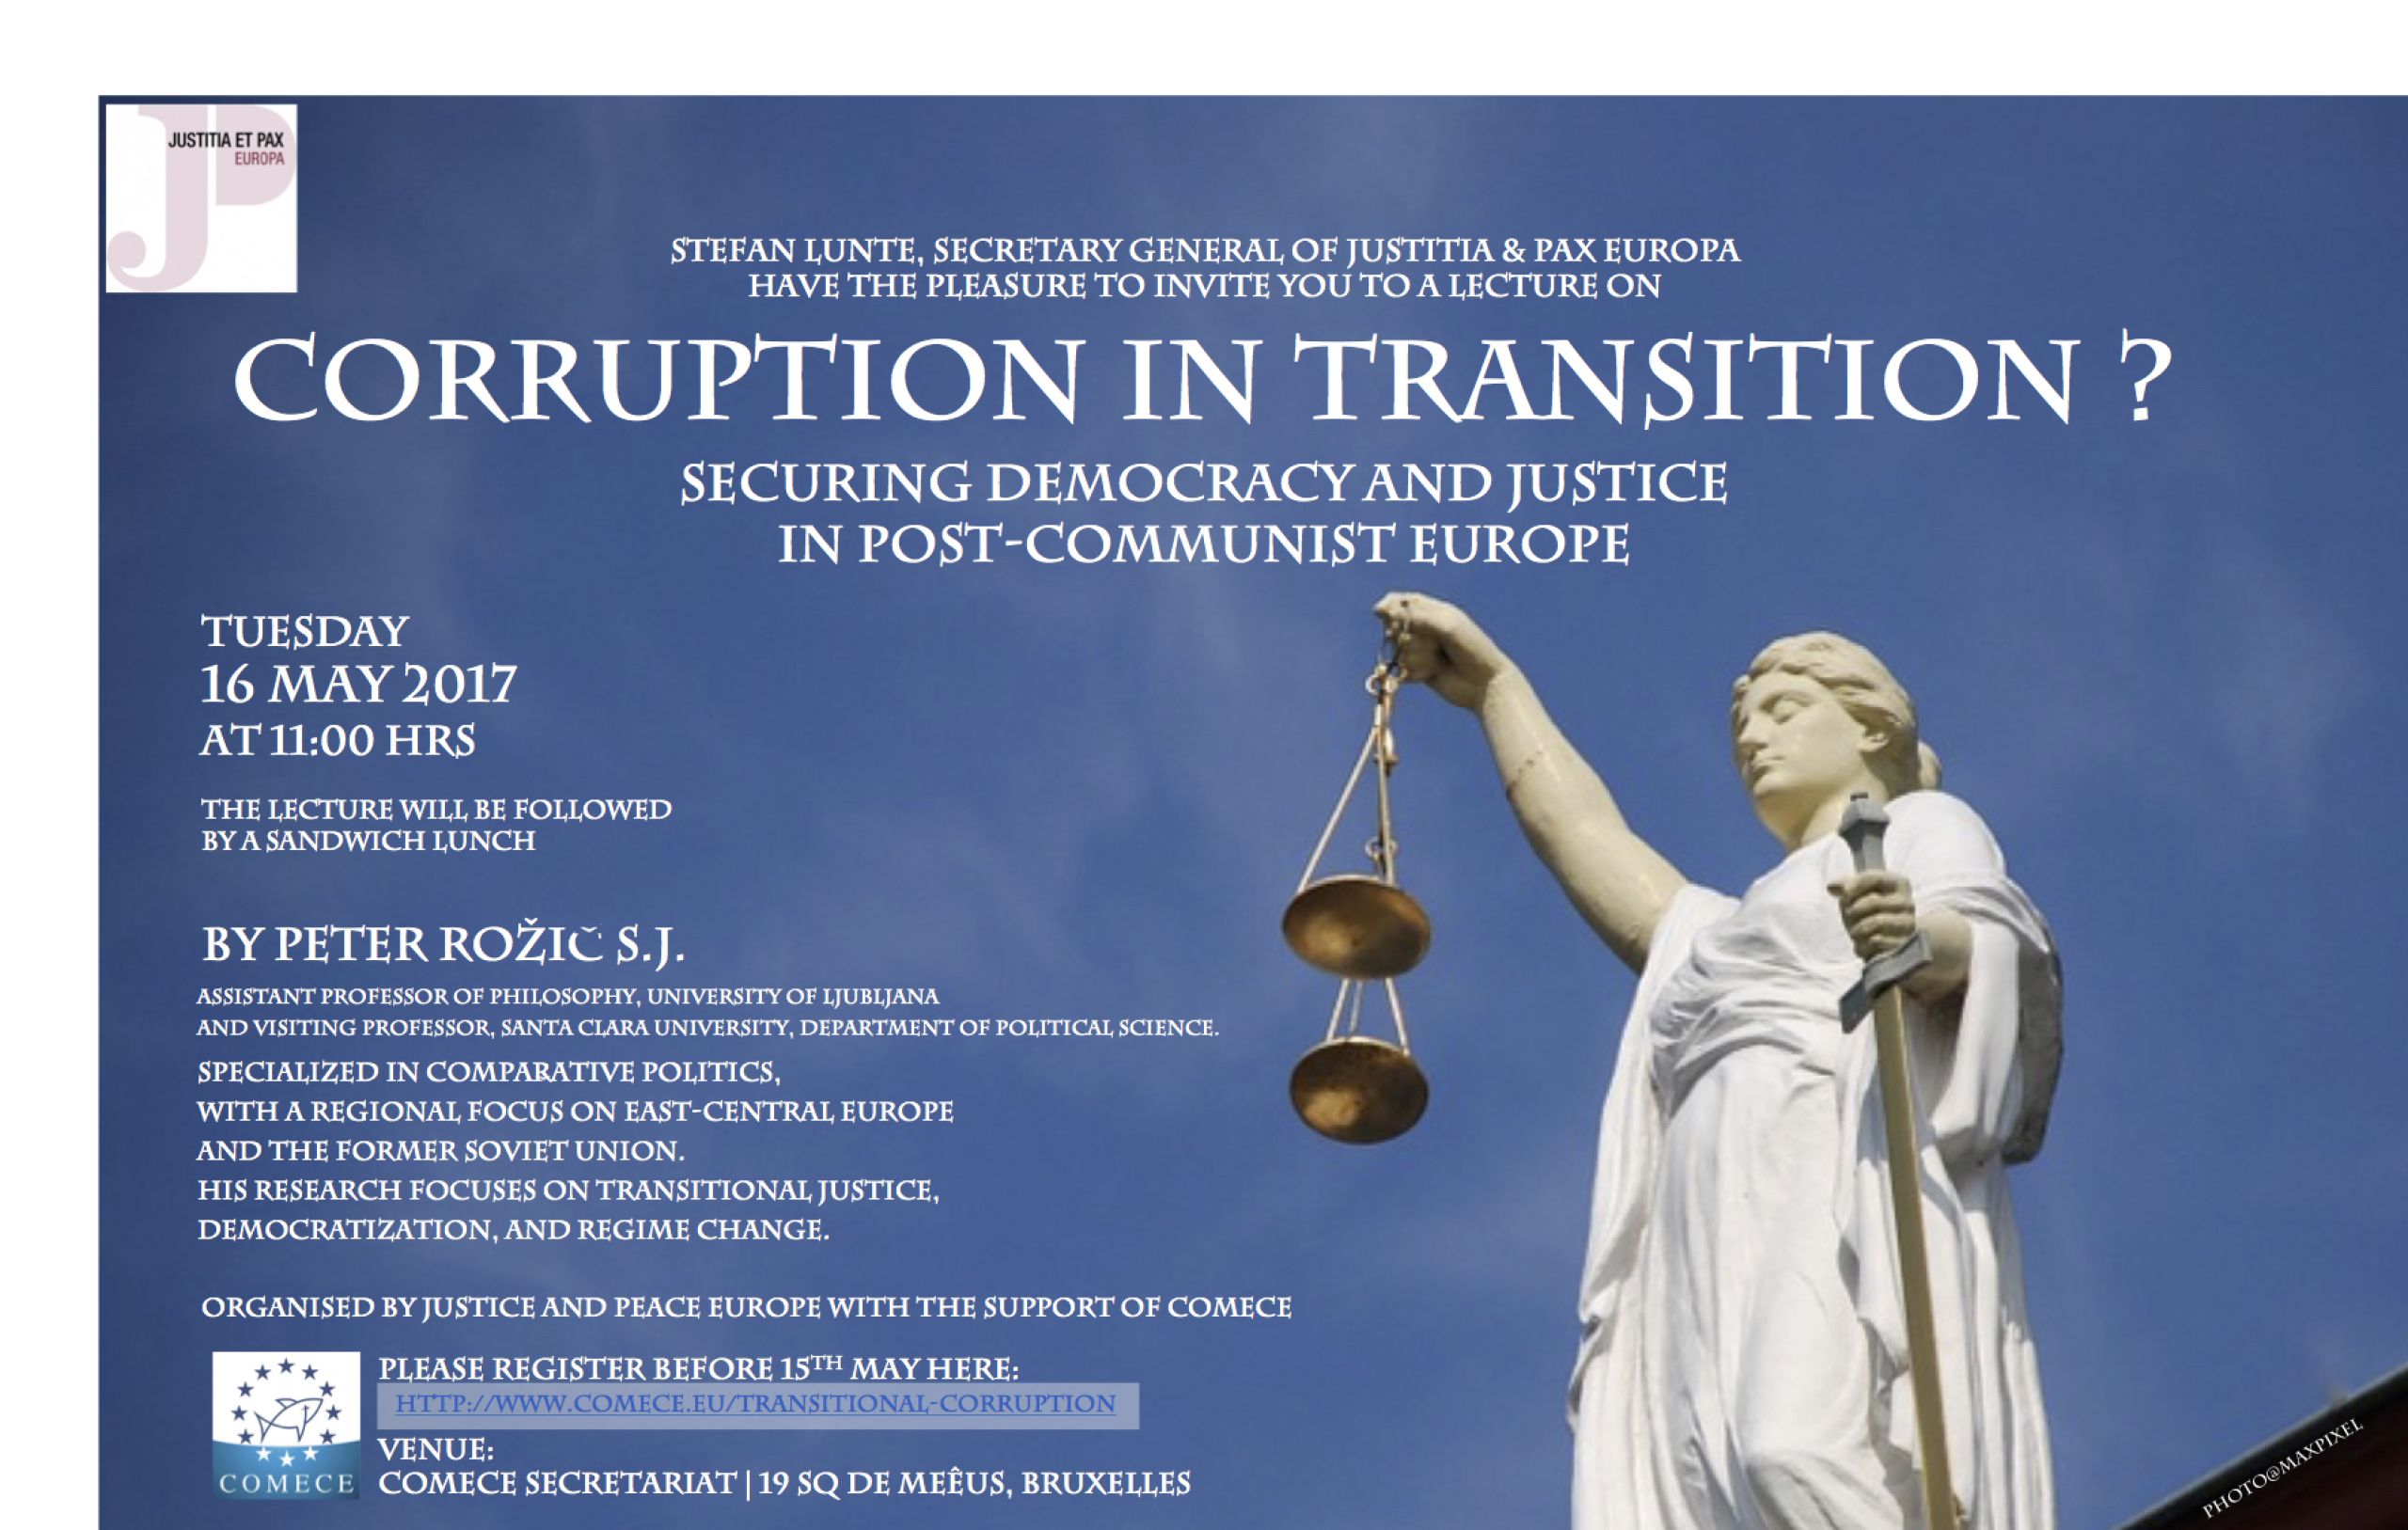 Transitional Corruption? - Securing Democracy and Justice in Post-Communist Europe